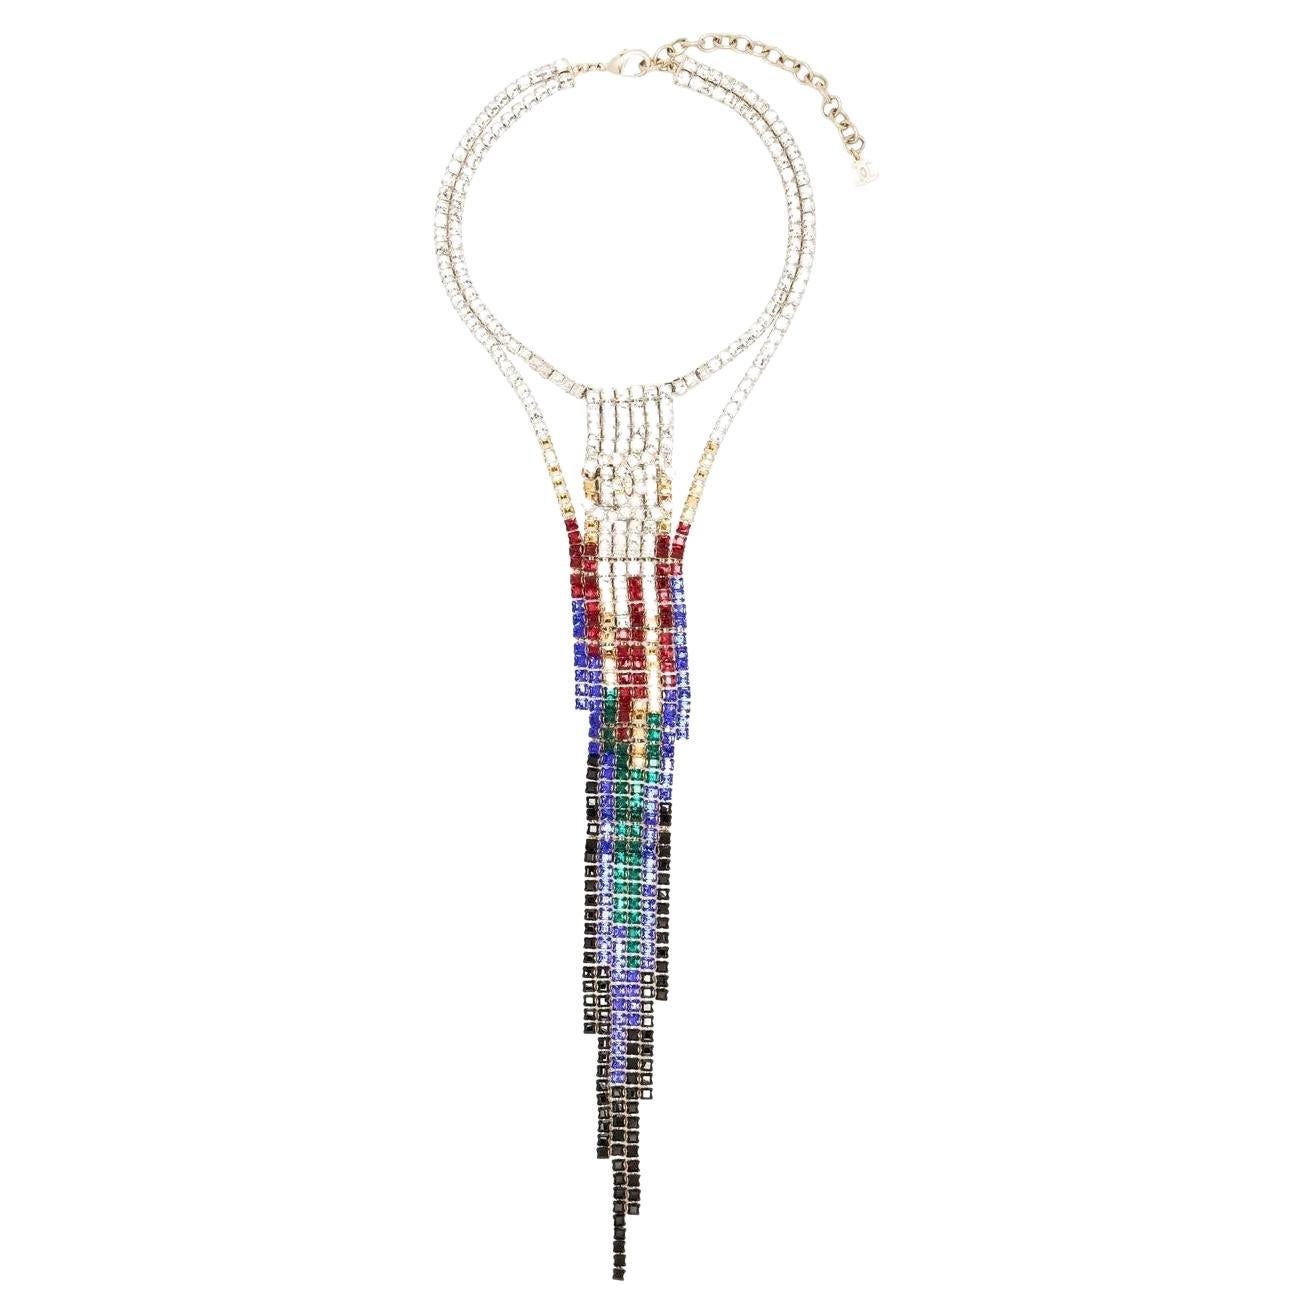 Chanel Pre-Fall 2019 Rainbow Rhinestone Statement Necklace For Sale